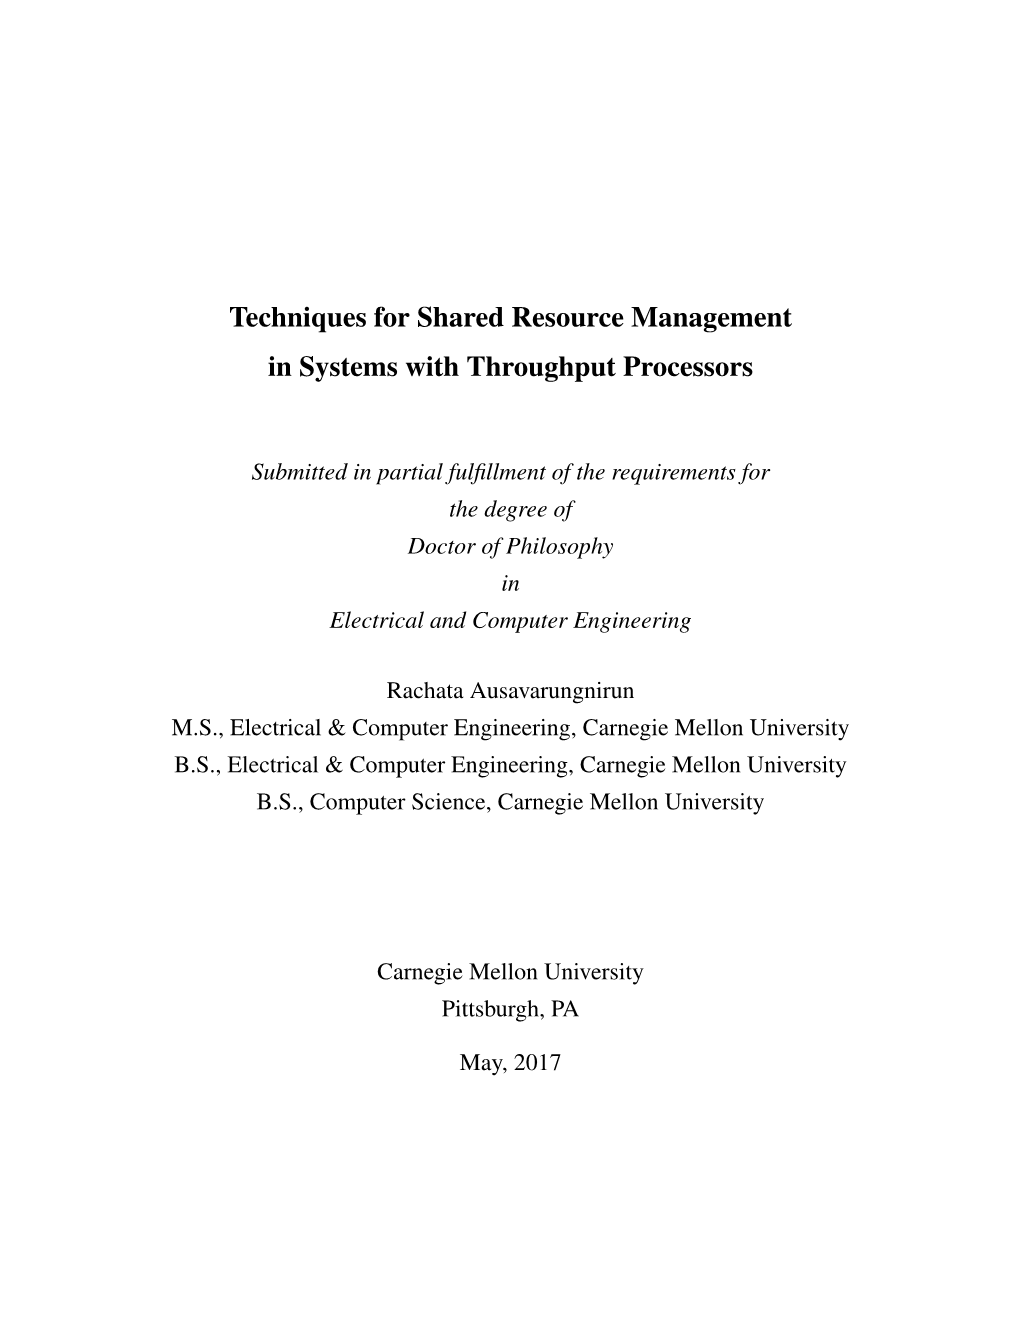 Techniques for Shared Resource Management in Systems with Throughput Processors